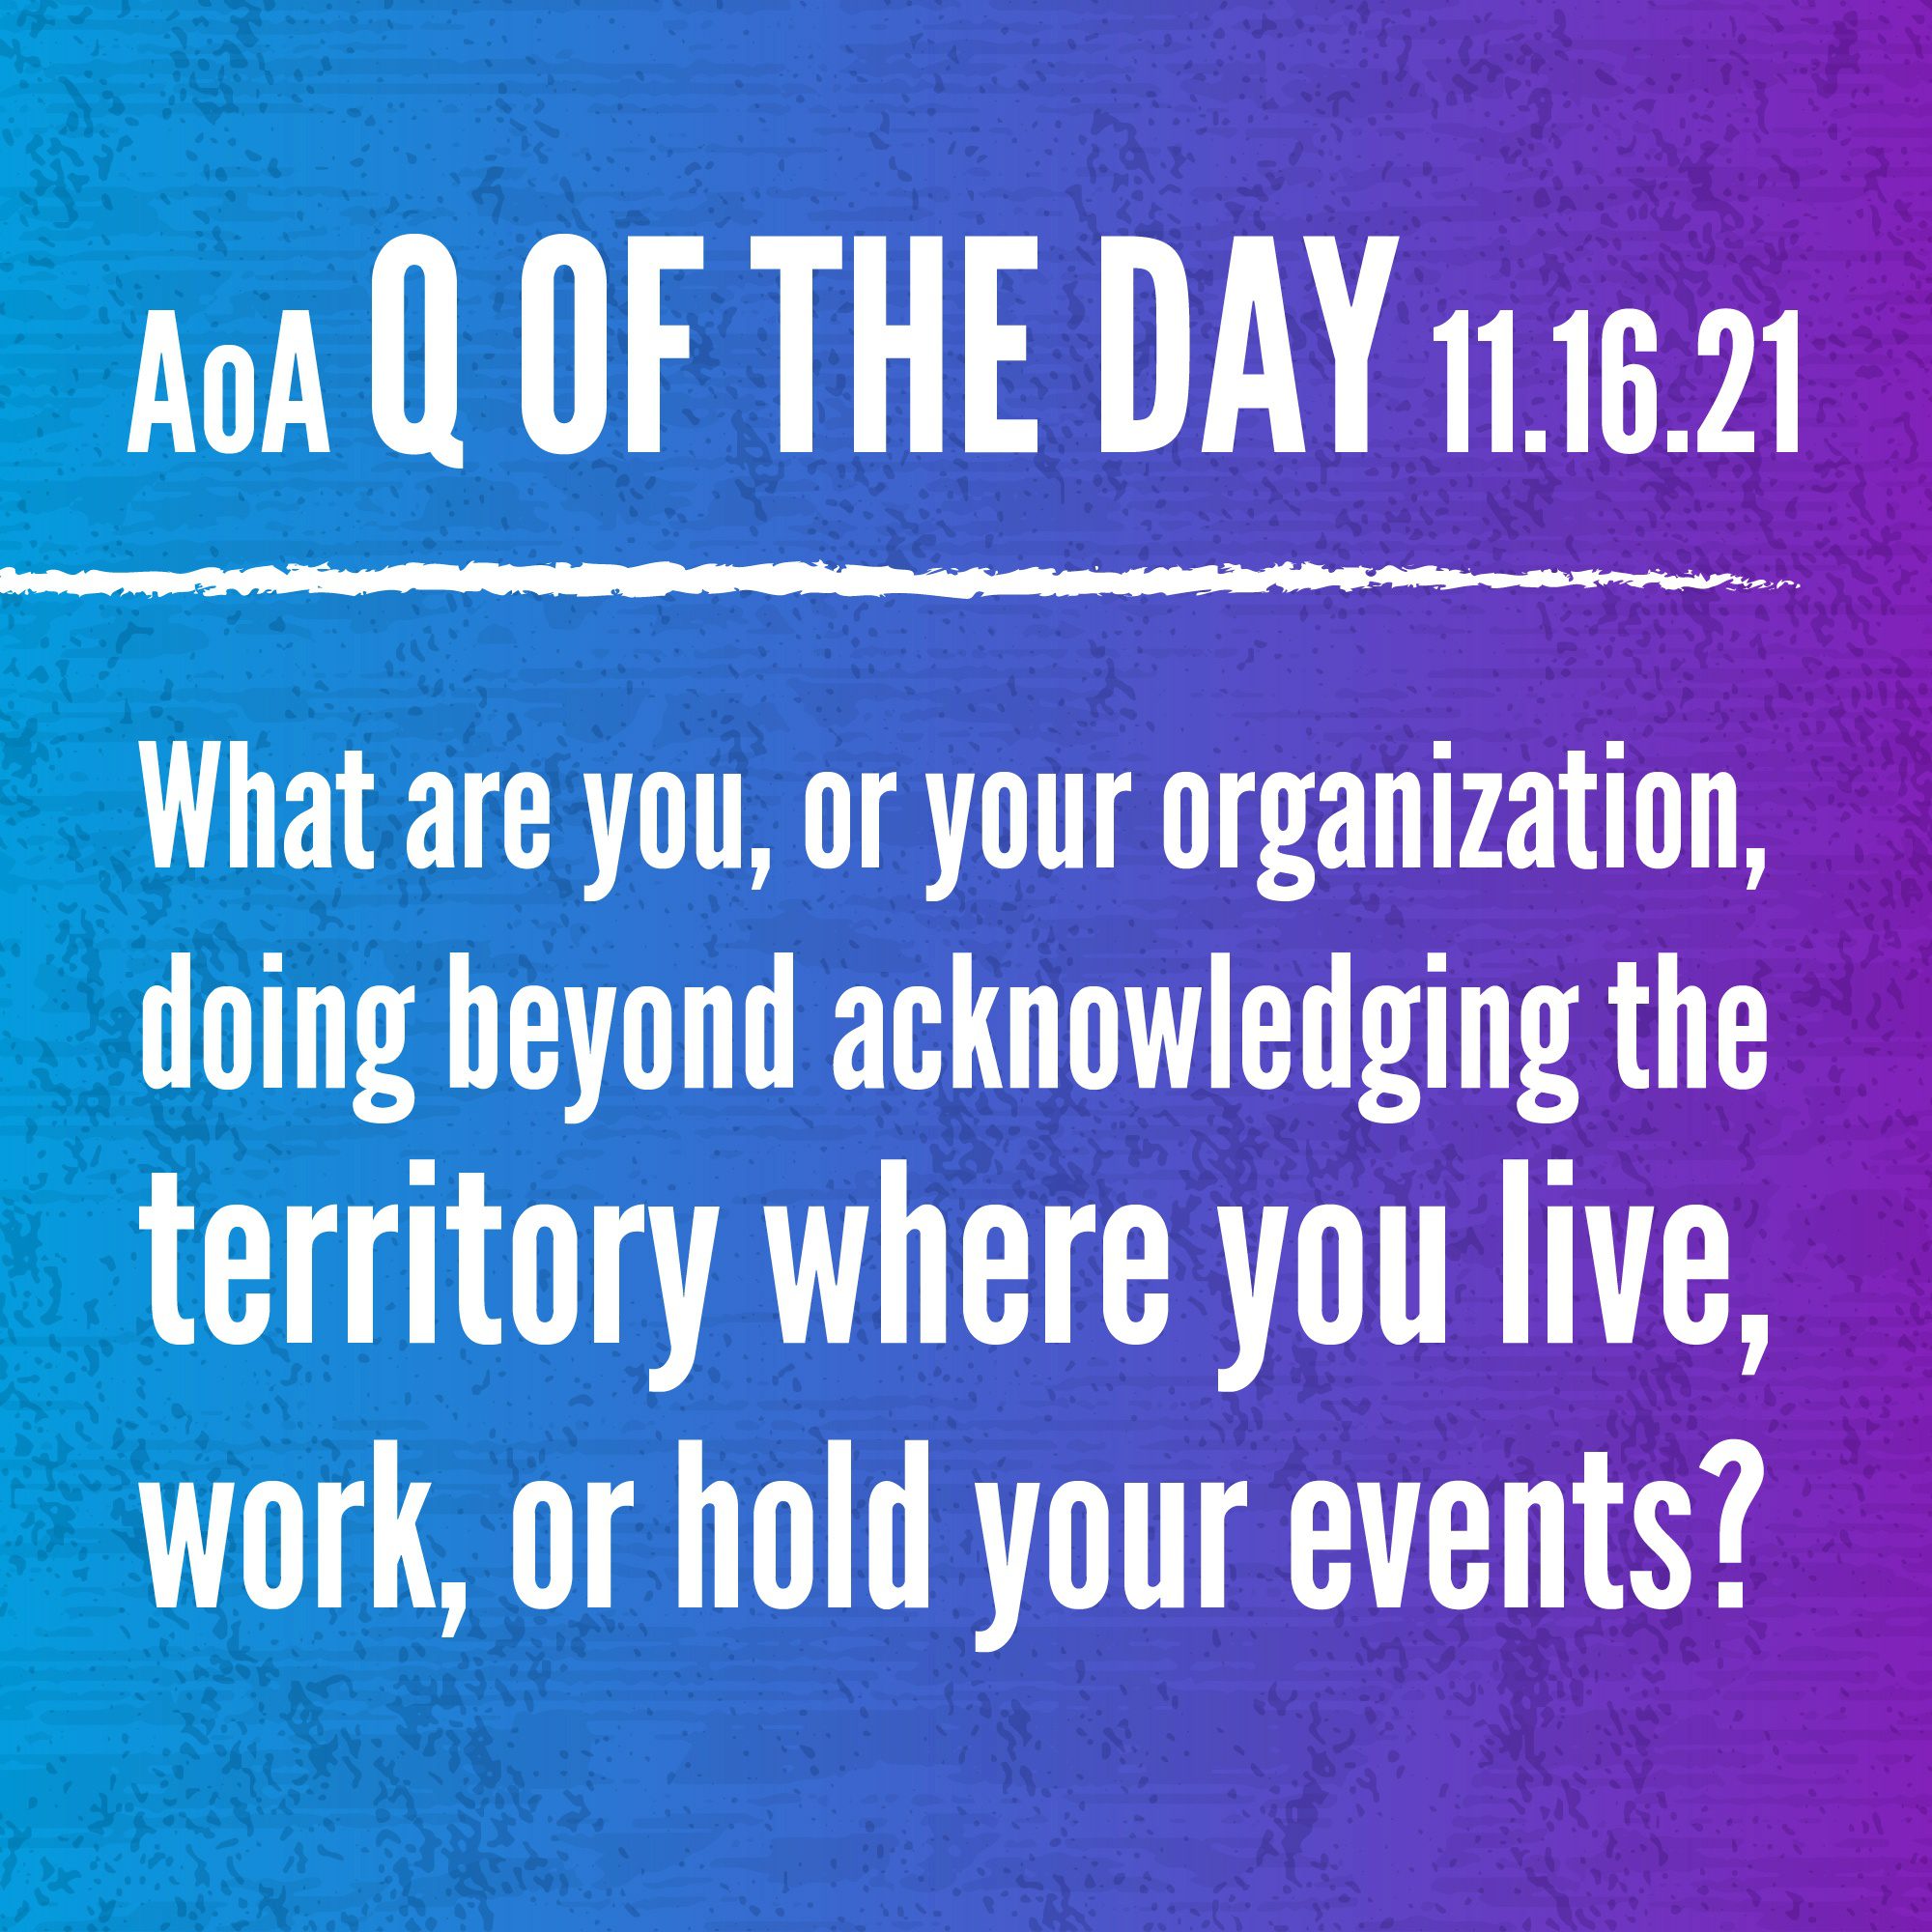 AoA Q of the Day November 16, 2021: What are you, or your organization, doing beyond acknowledging the territory where you live, work or hold your events?